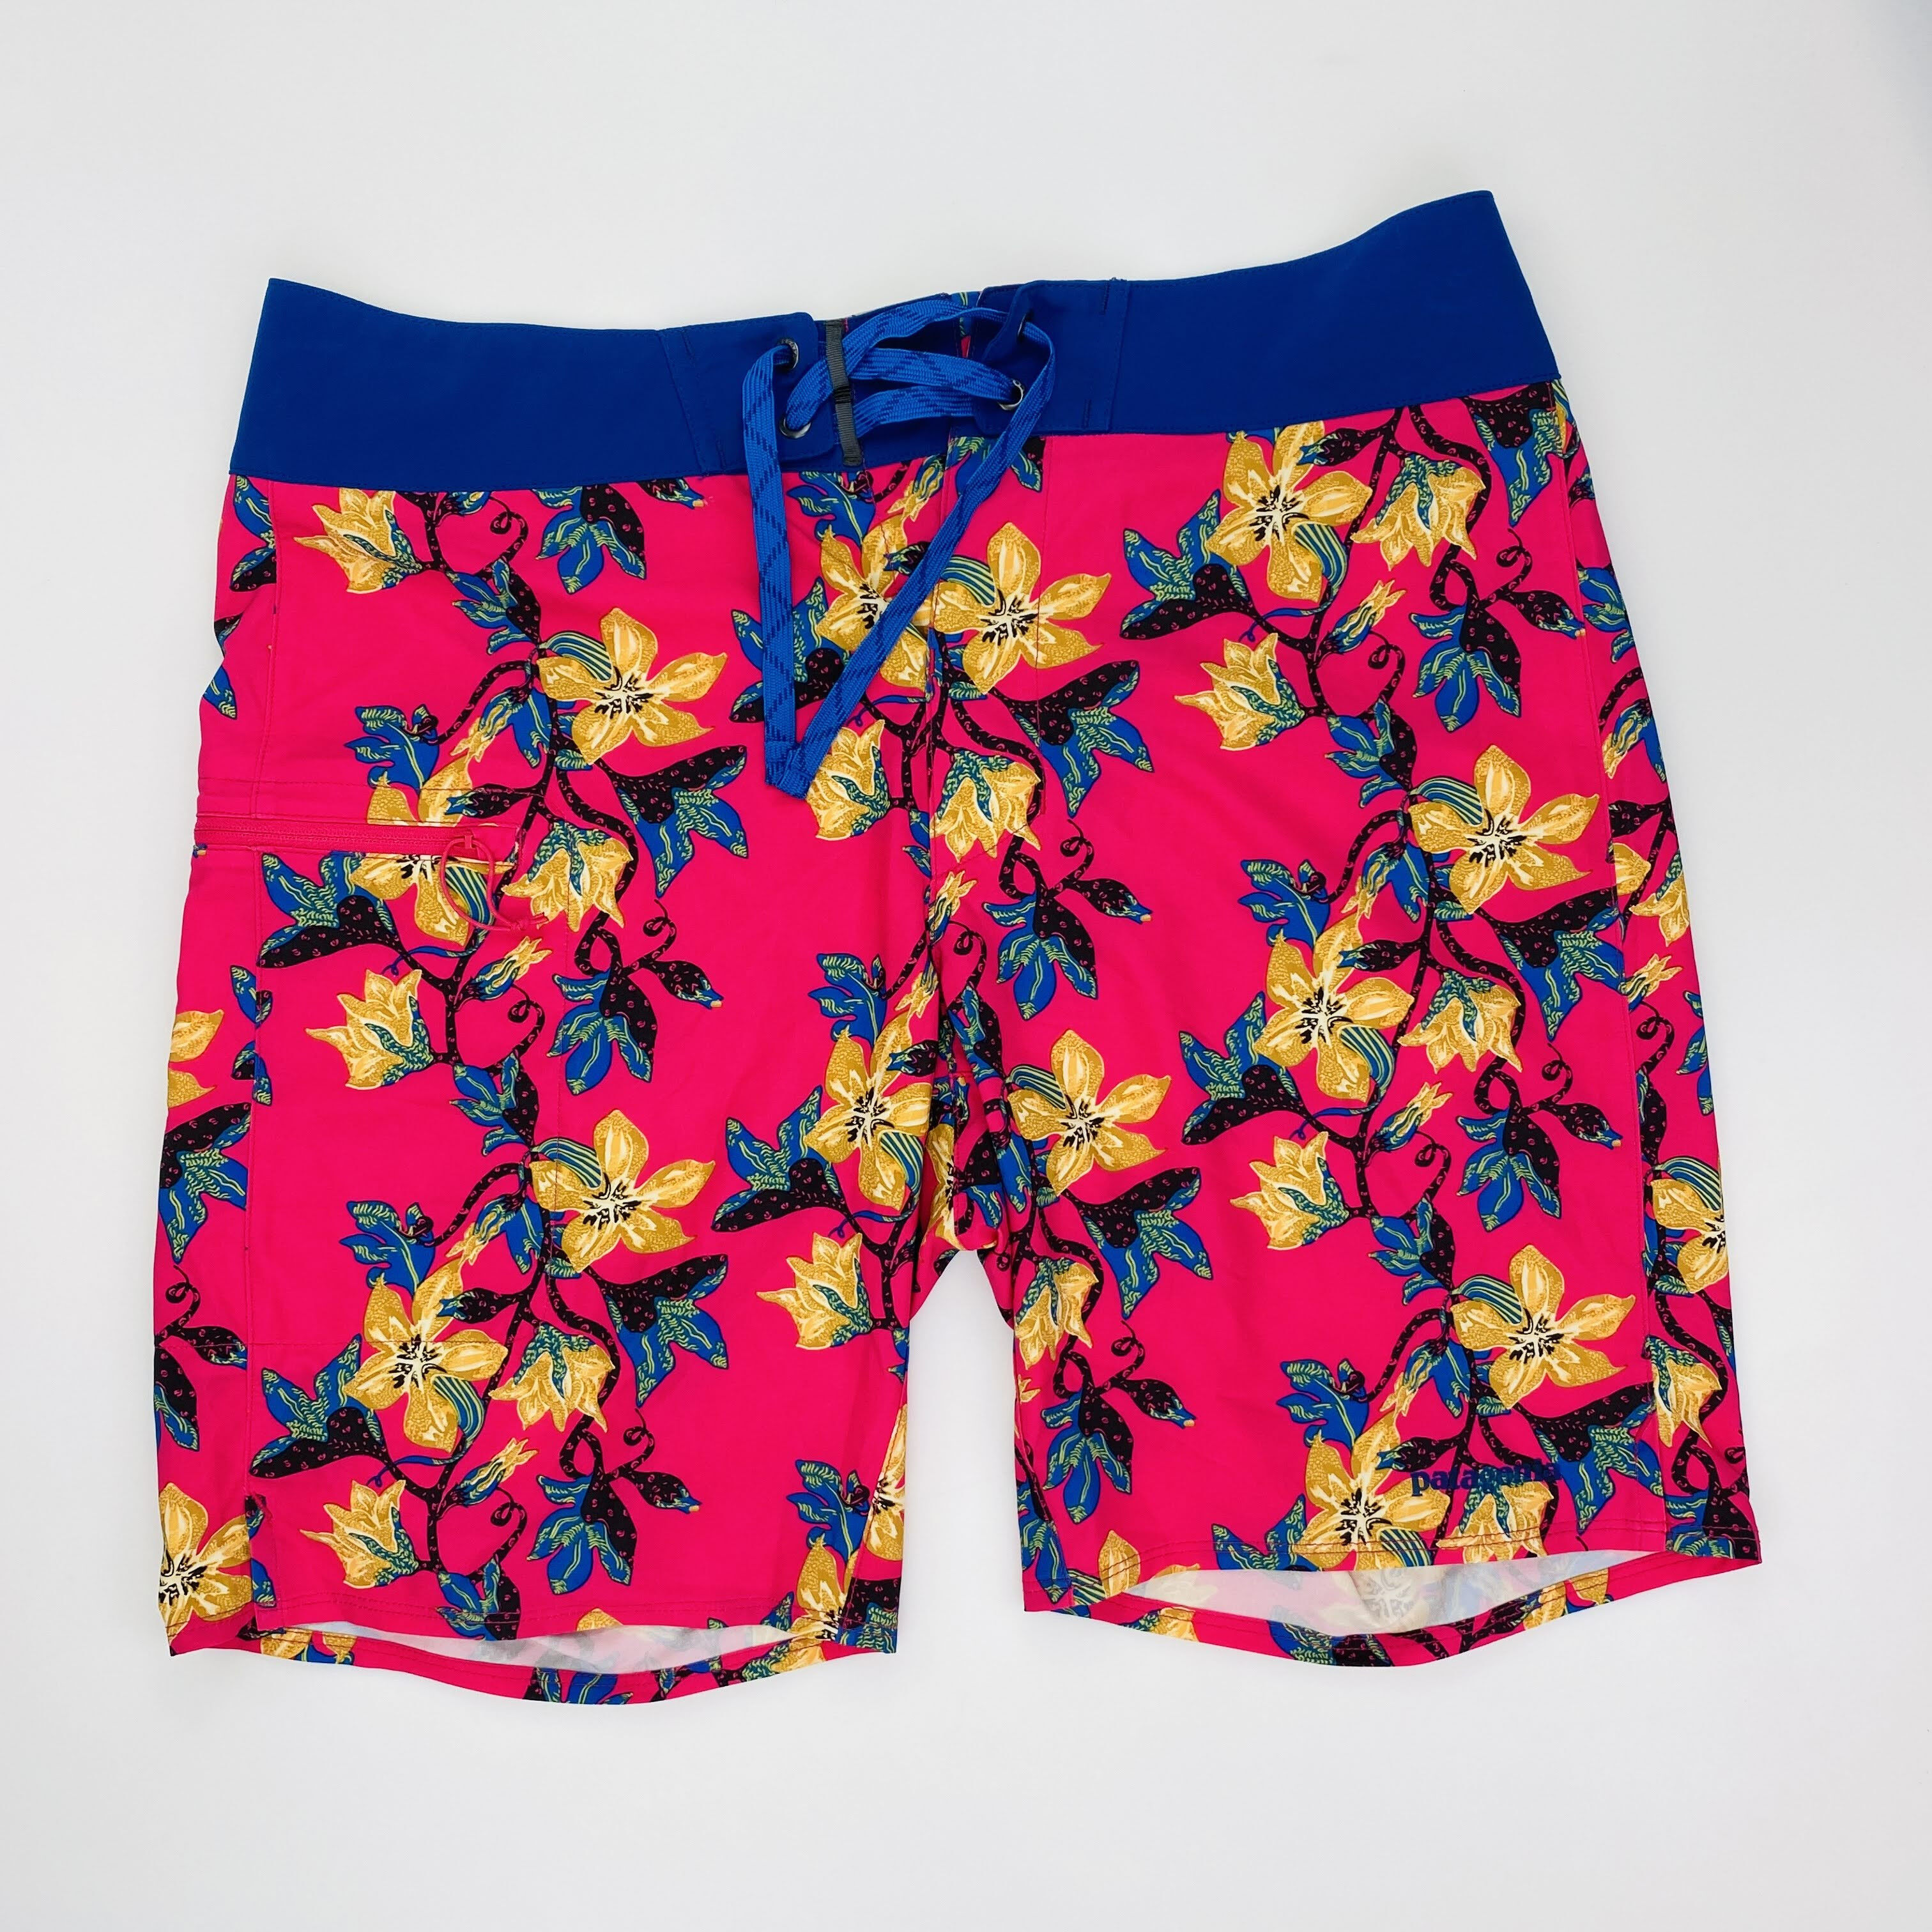 Patagonia M's Stretch Planing Boardshorts - 19 in. - Seconde main Short homme - Multicolore - 42 | Hardloop